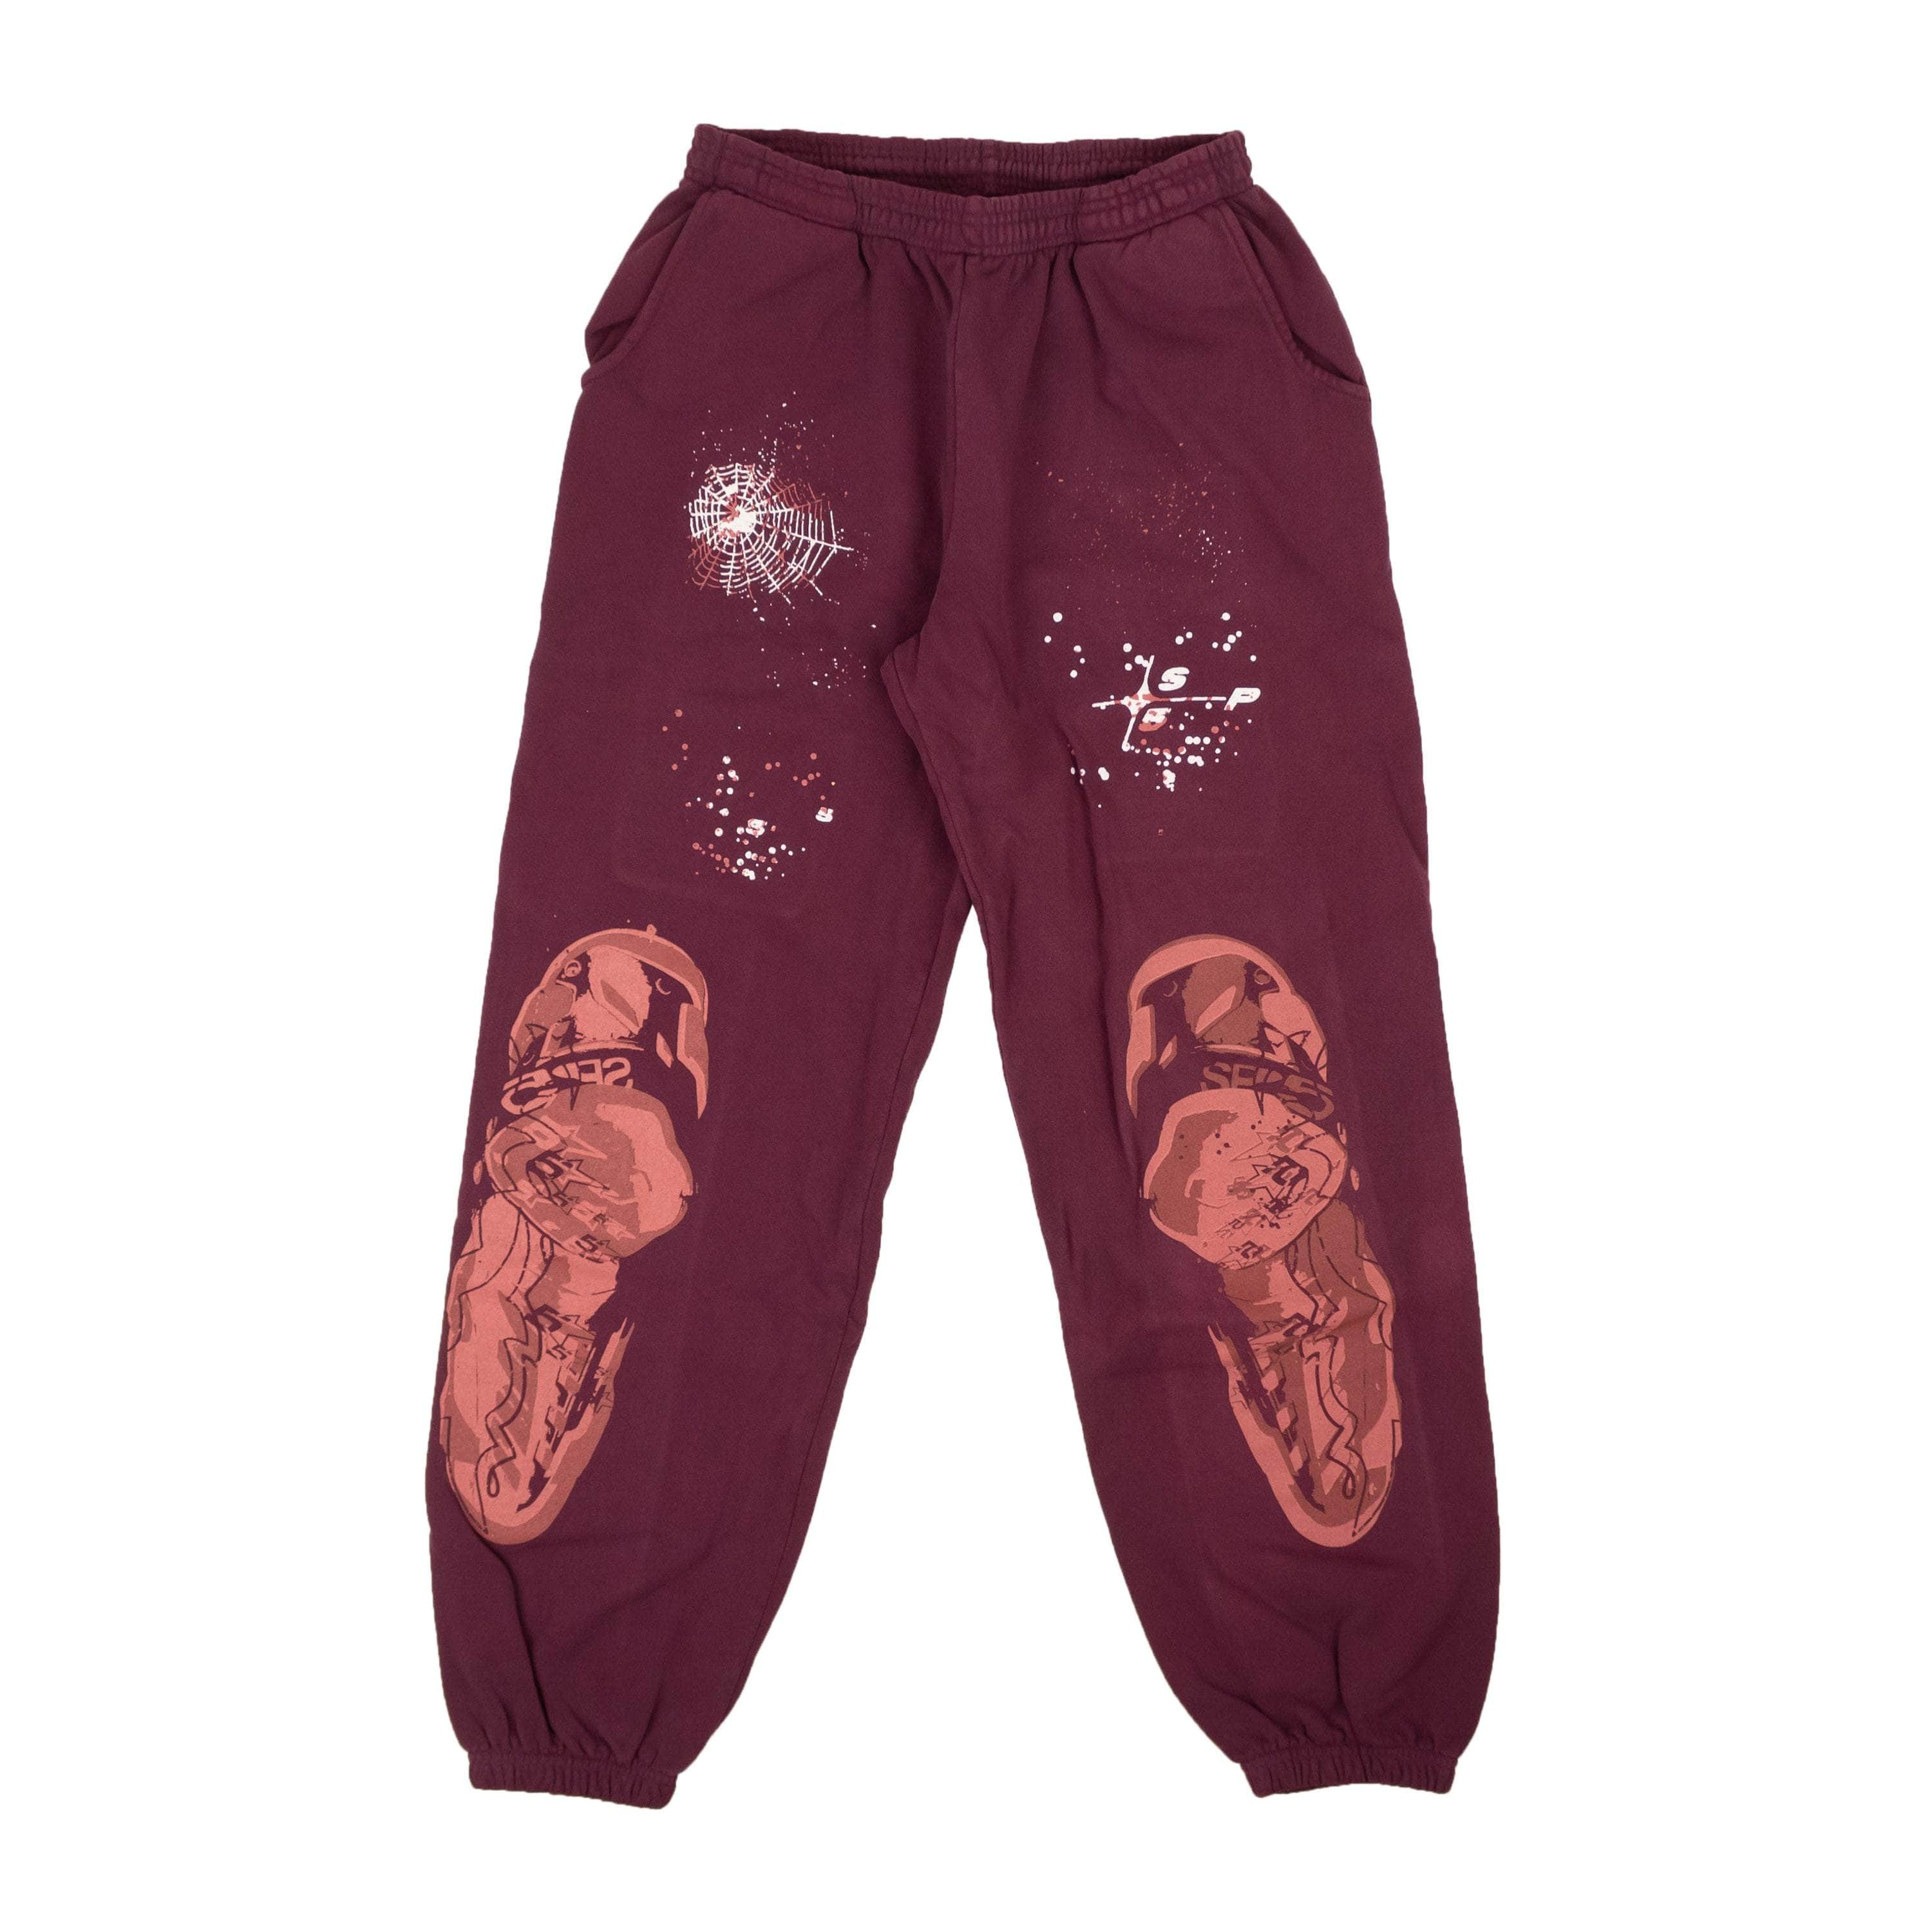 SP5DER channelenable-all, chicmi, couponcollection, gender-mens, main-clothing, mens-joggers-sweatpants, mens-shoes, shop375, Stadium Goods, under-250 Nocturnal Highway Sweatpant